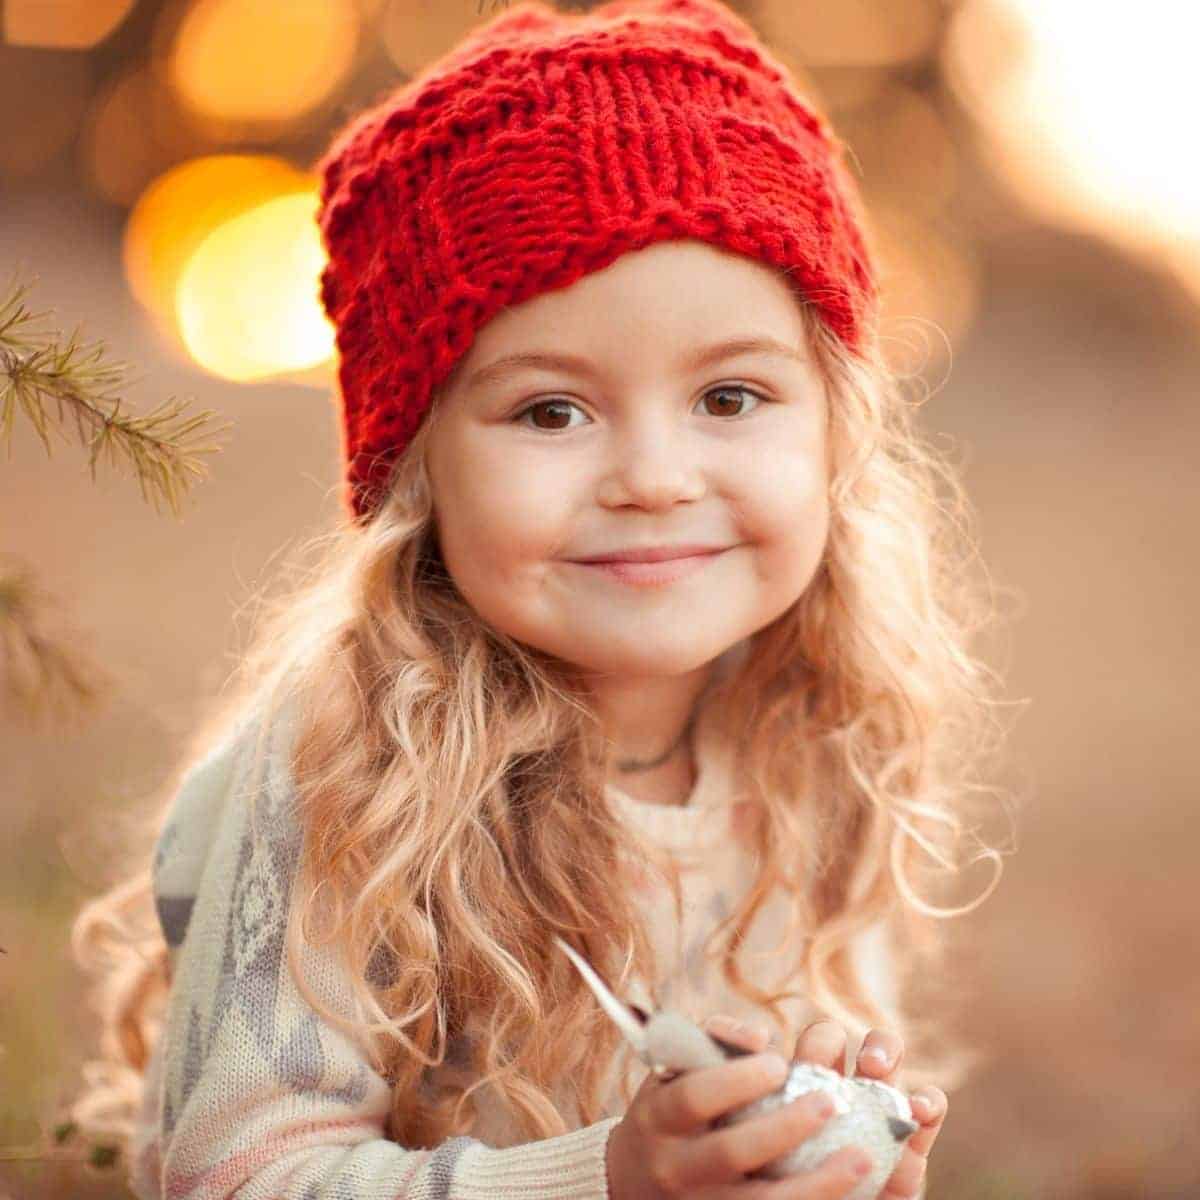 Child wearing a beanie and smiling outdoors.